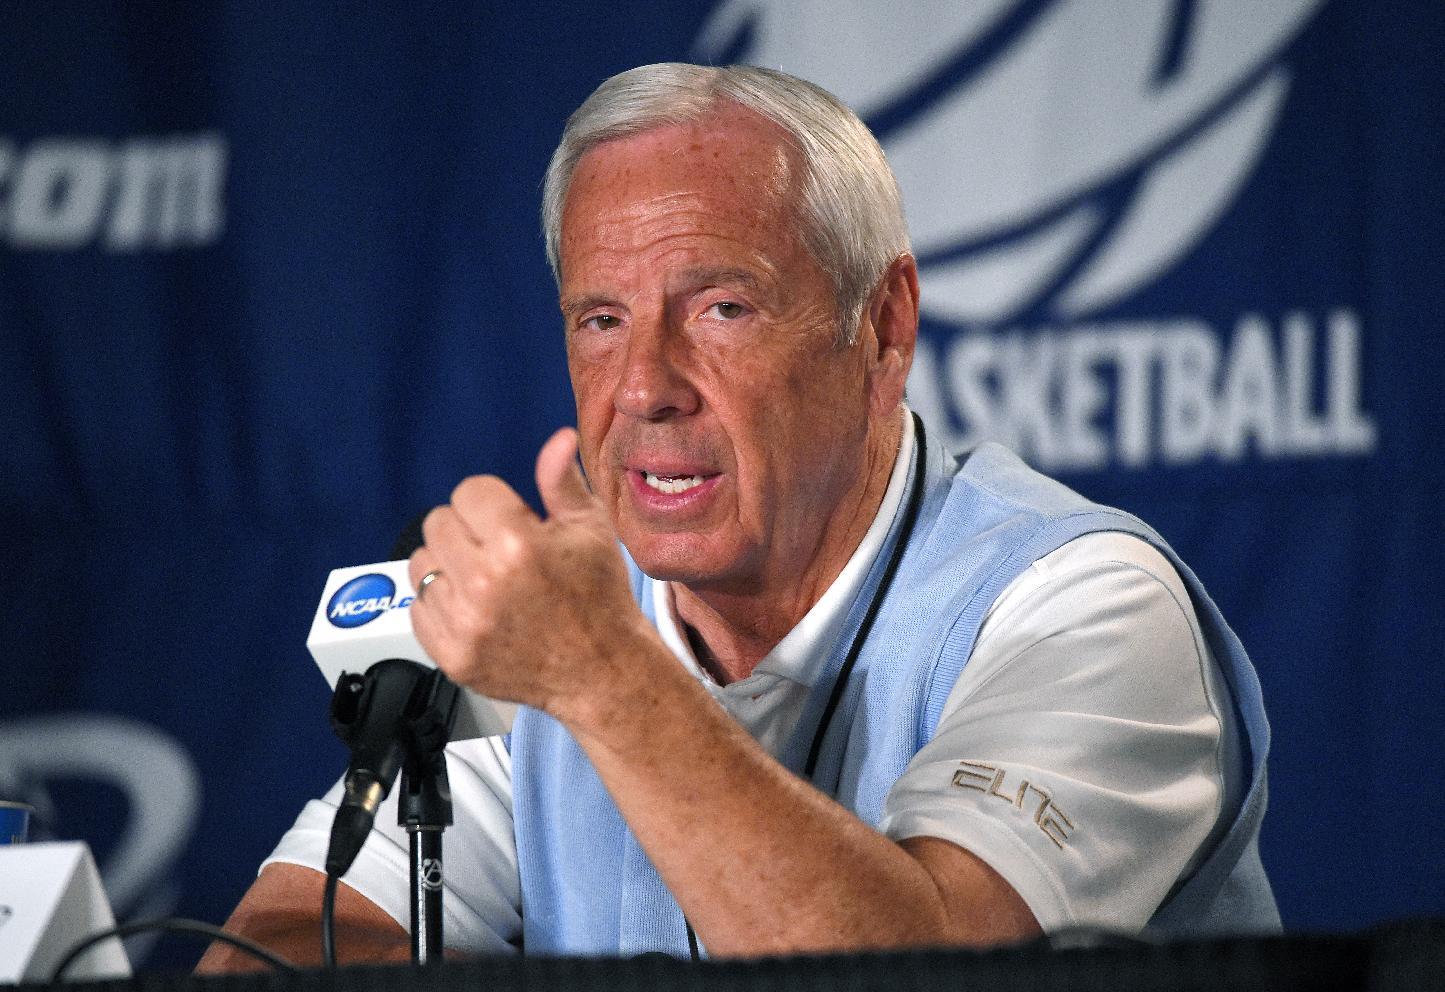 North Carolina coach Roy Williams insists he was not involved in any academic impropriety. (AP)